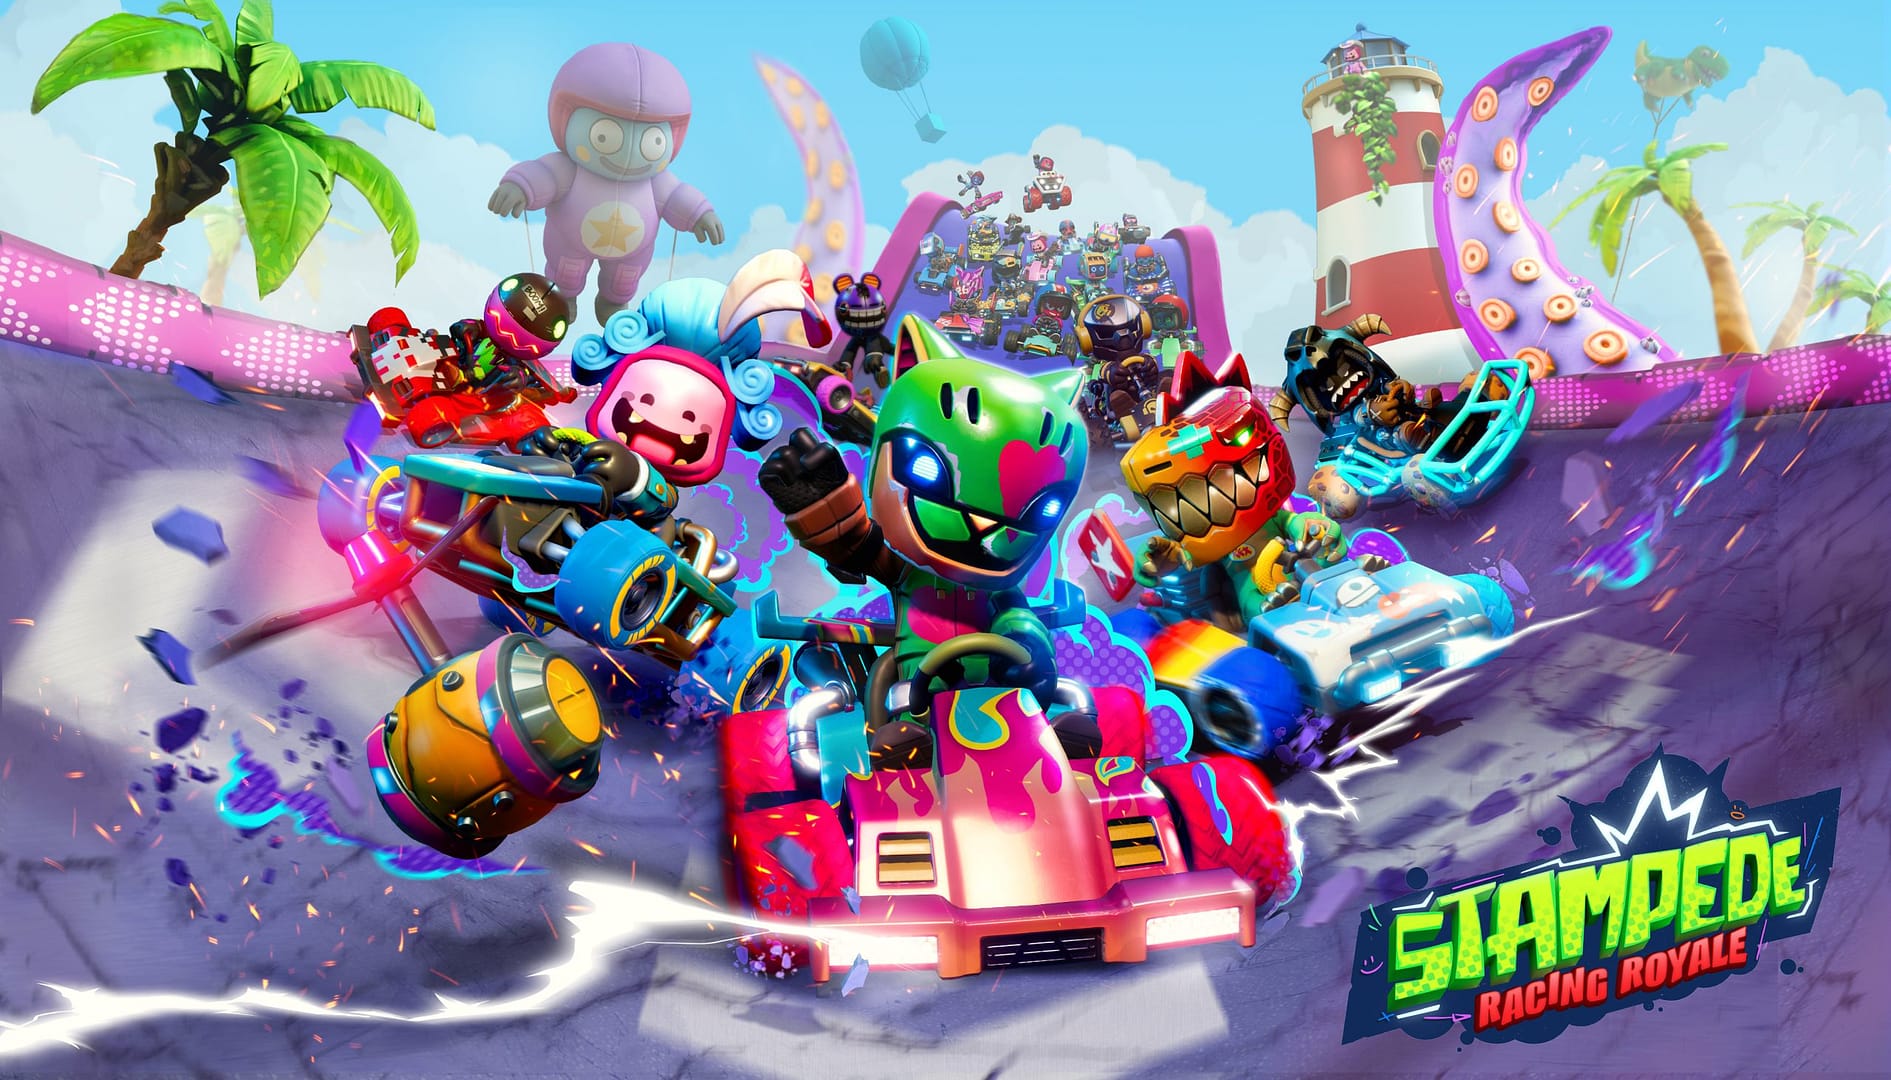 Stampede: Racing Royale speeds into Early Access this summer